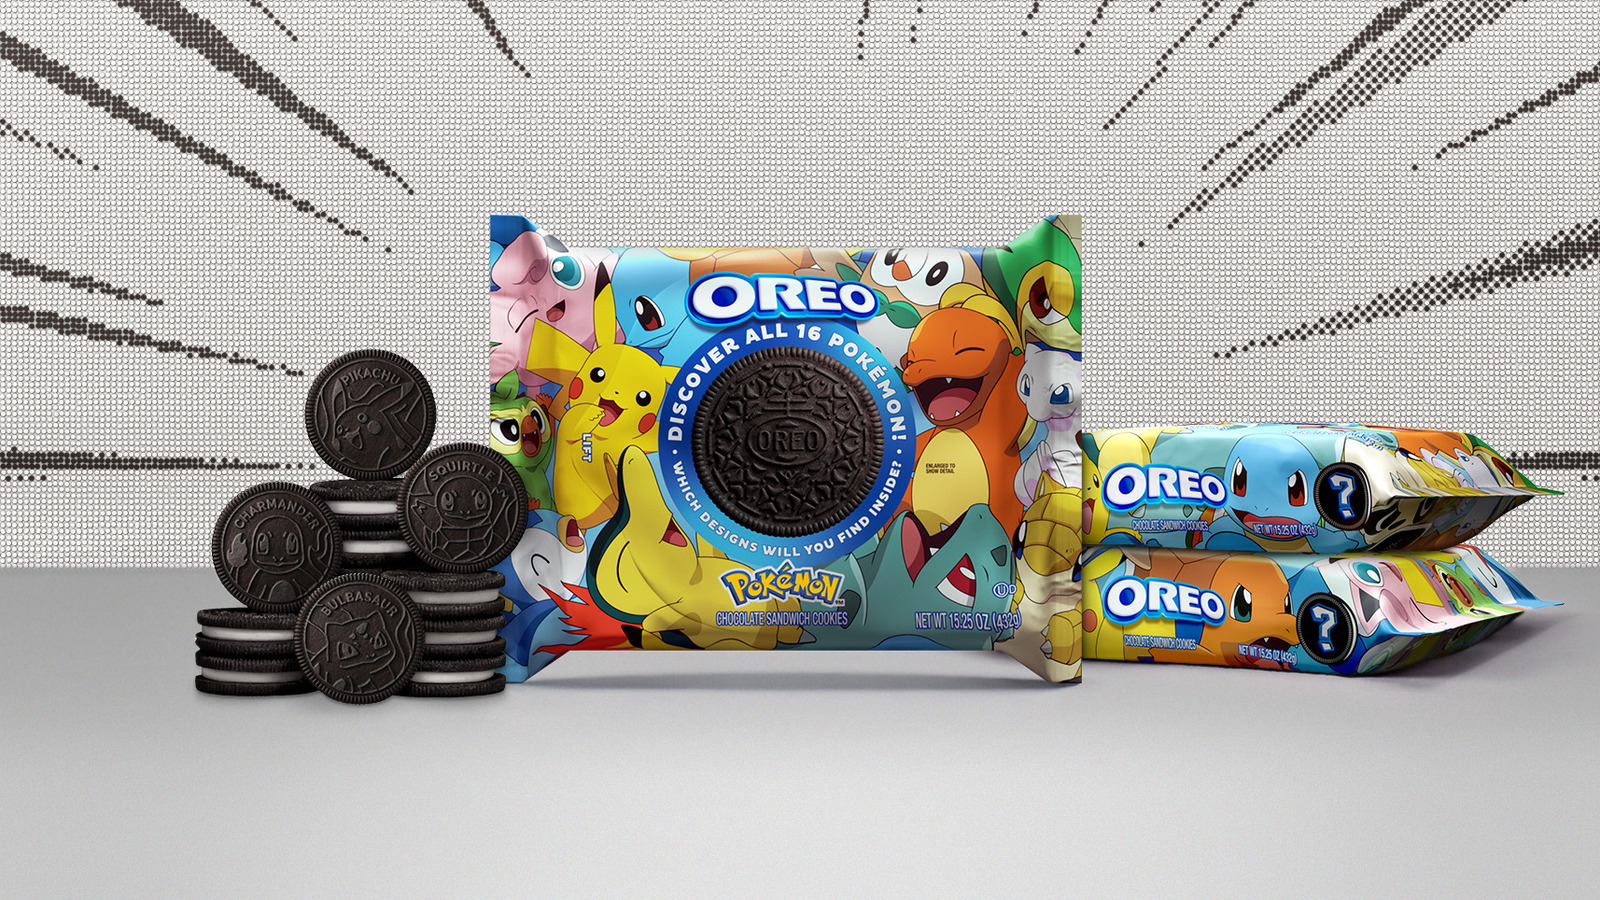 Pokémon Fans Won't Want To Miss This Limited Edition Oreo Collab